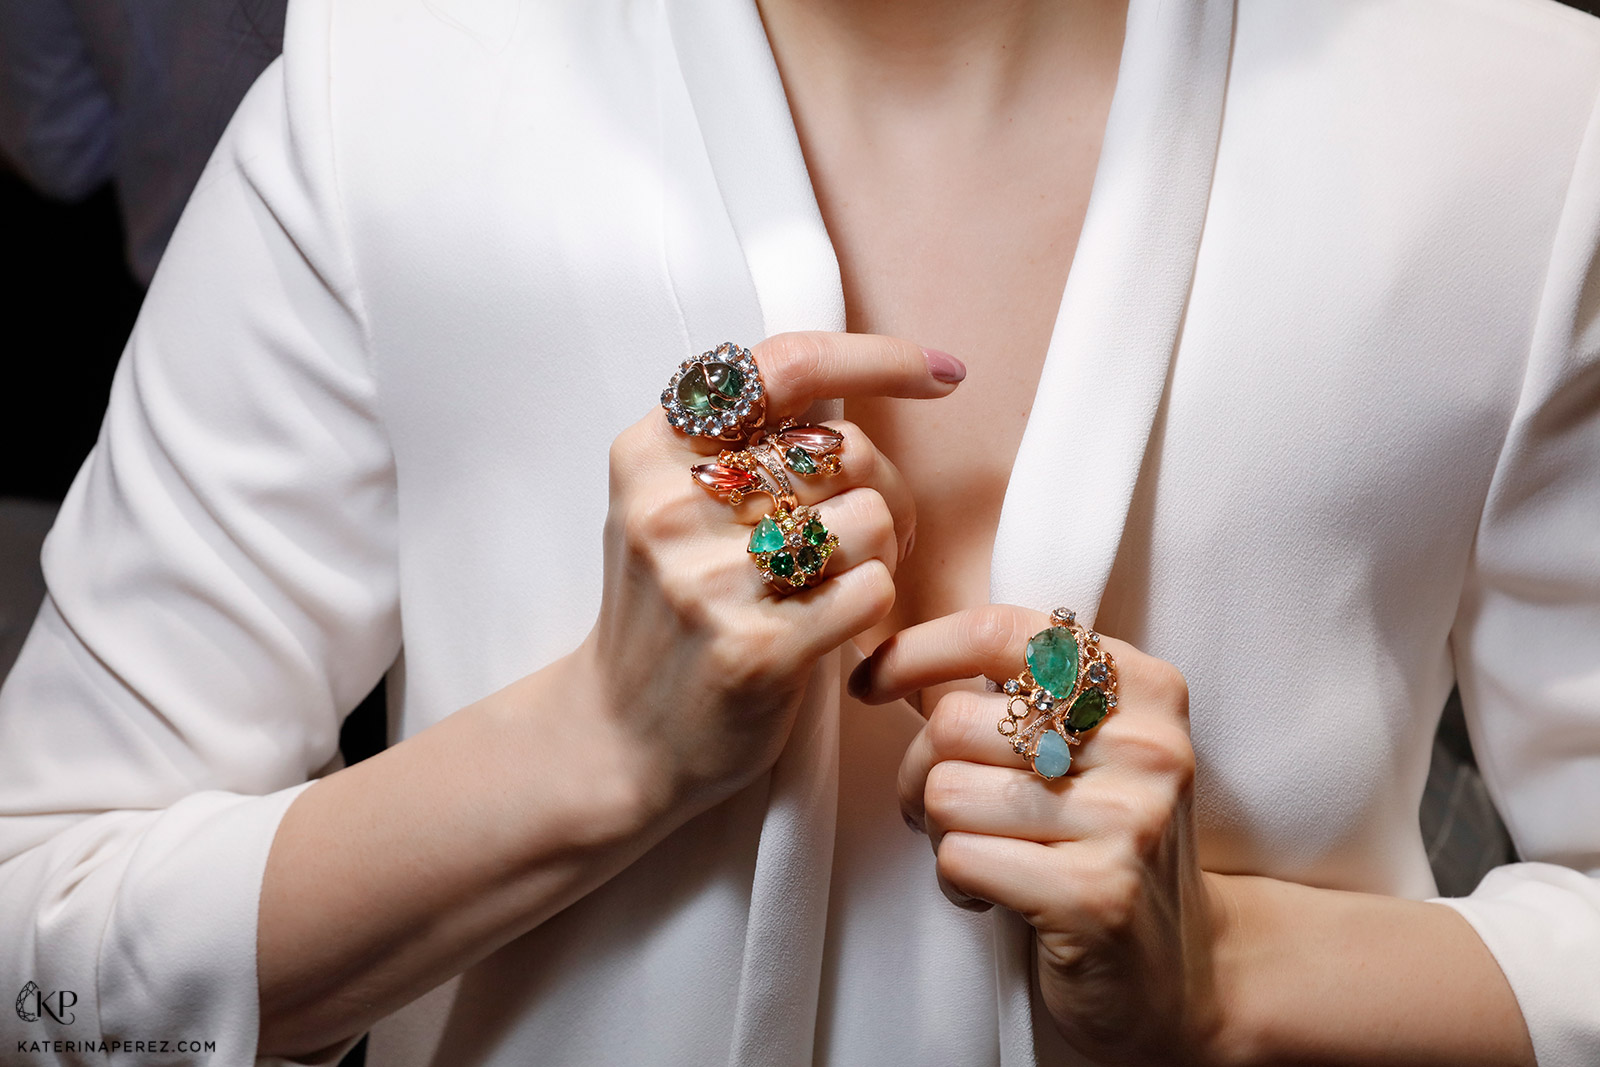 Federica Rettore rings from various collections